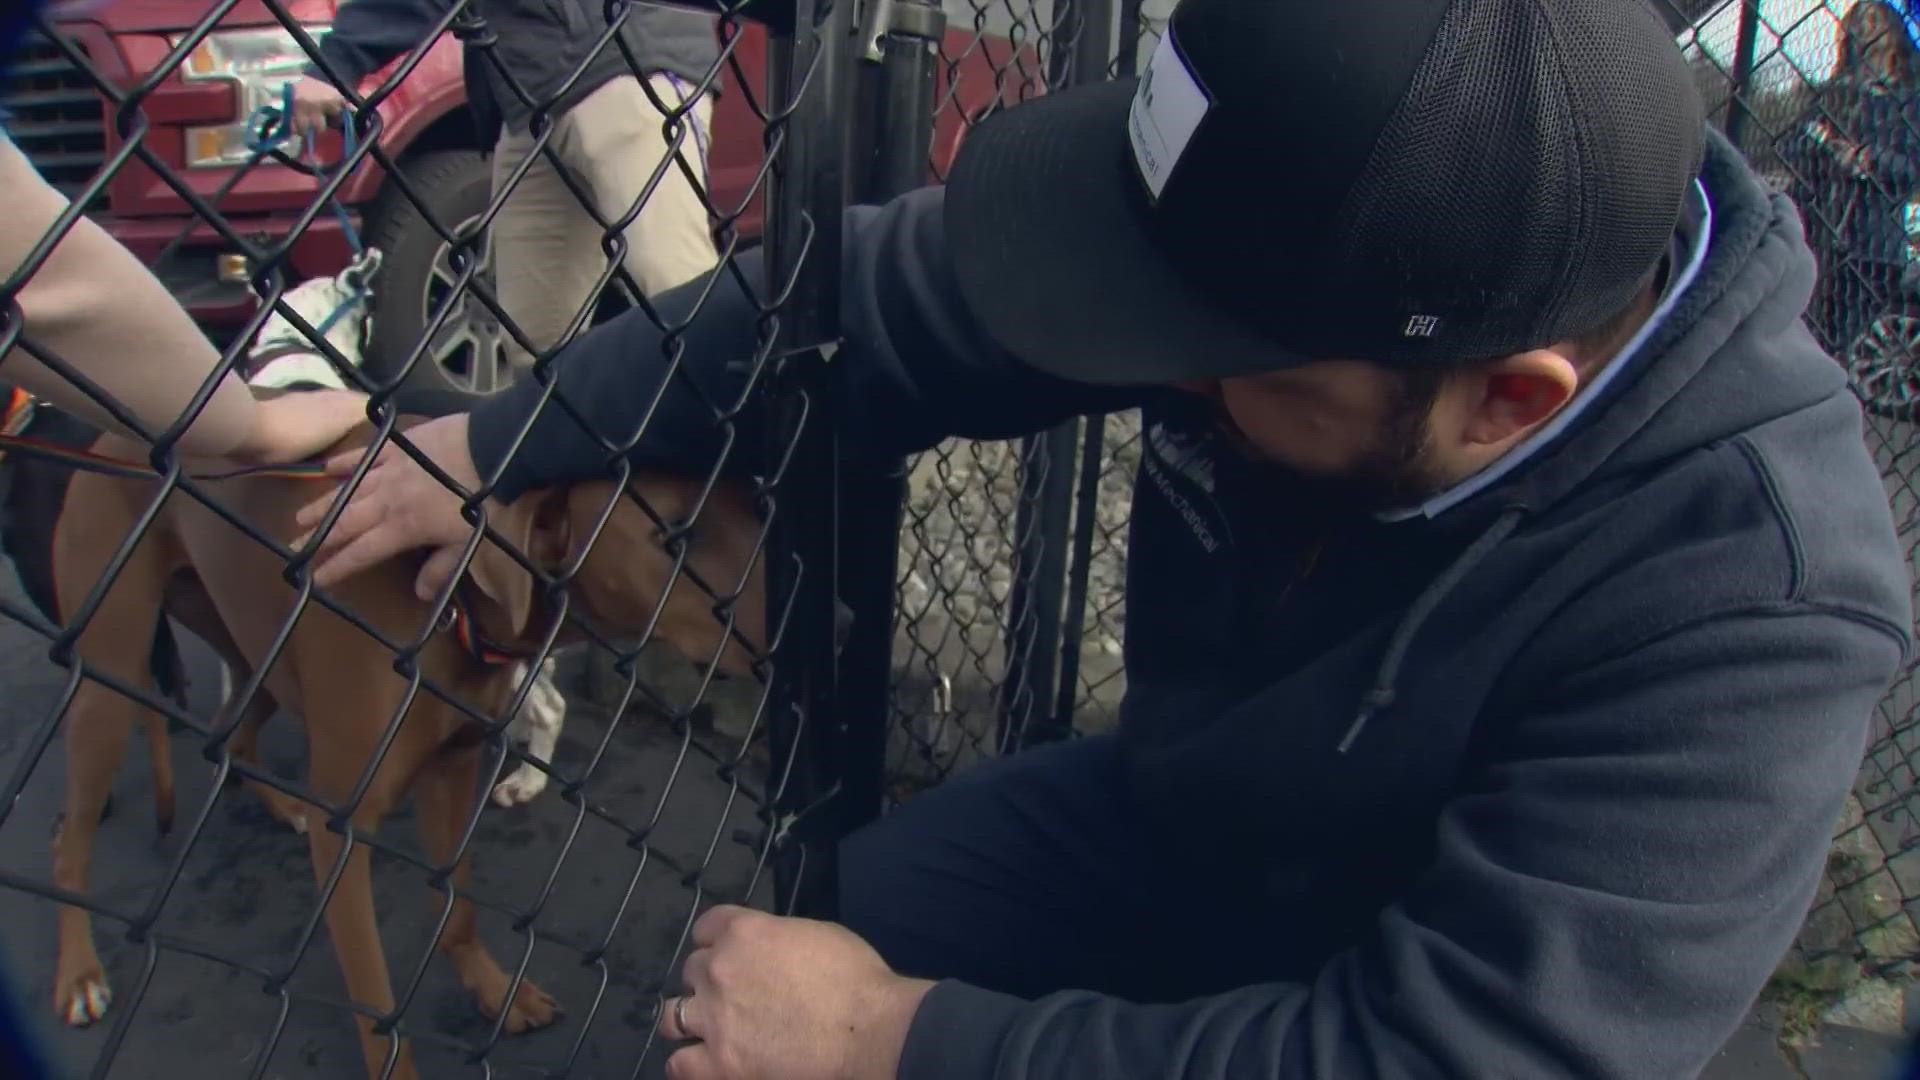 When a fire broke out at The Dog Resort in Lake City, workers at area businesses pitched in to corral, house and reunite almost 100 dogs with their owners